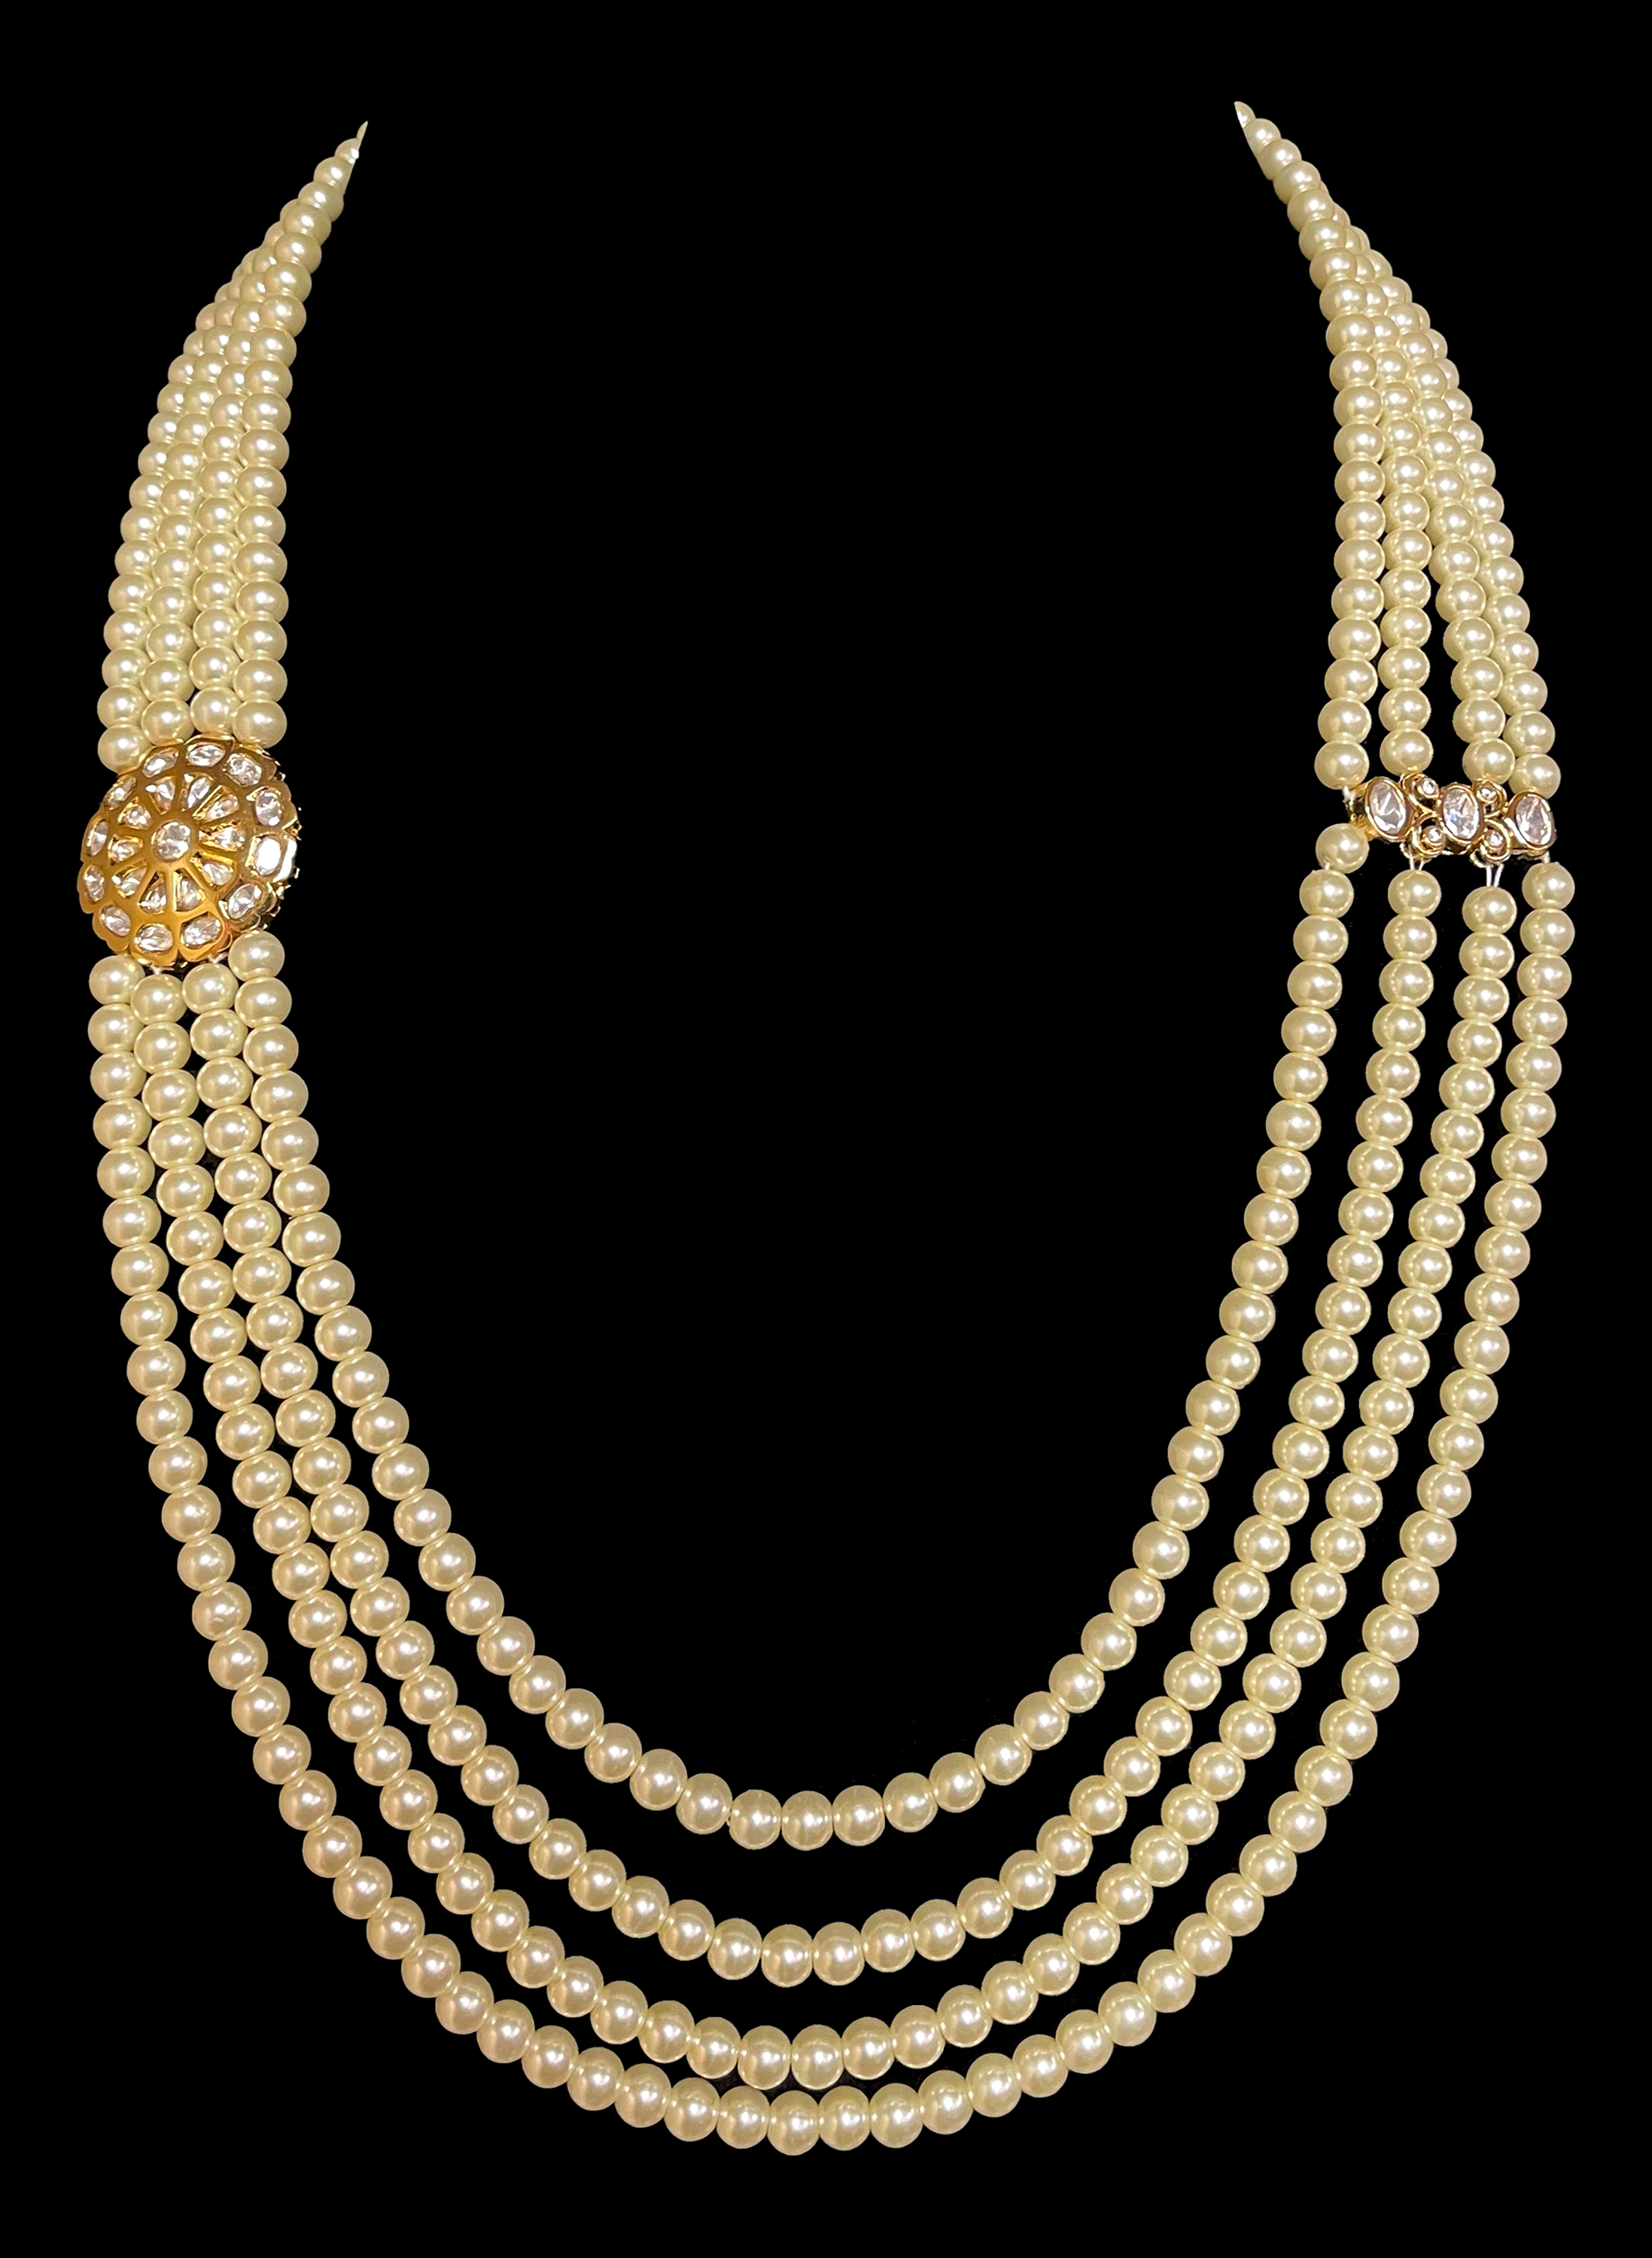 Pearl Mala Necklace for Indian men, bridal accessories 